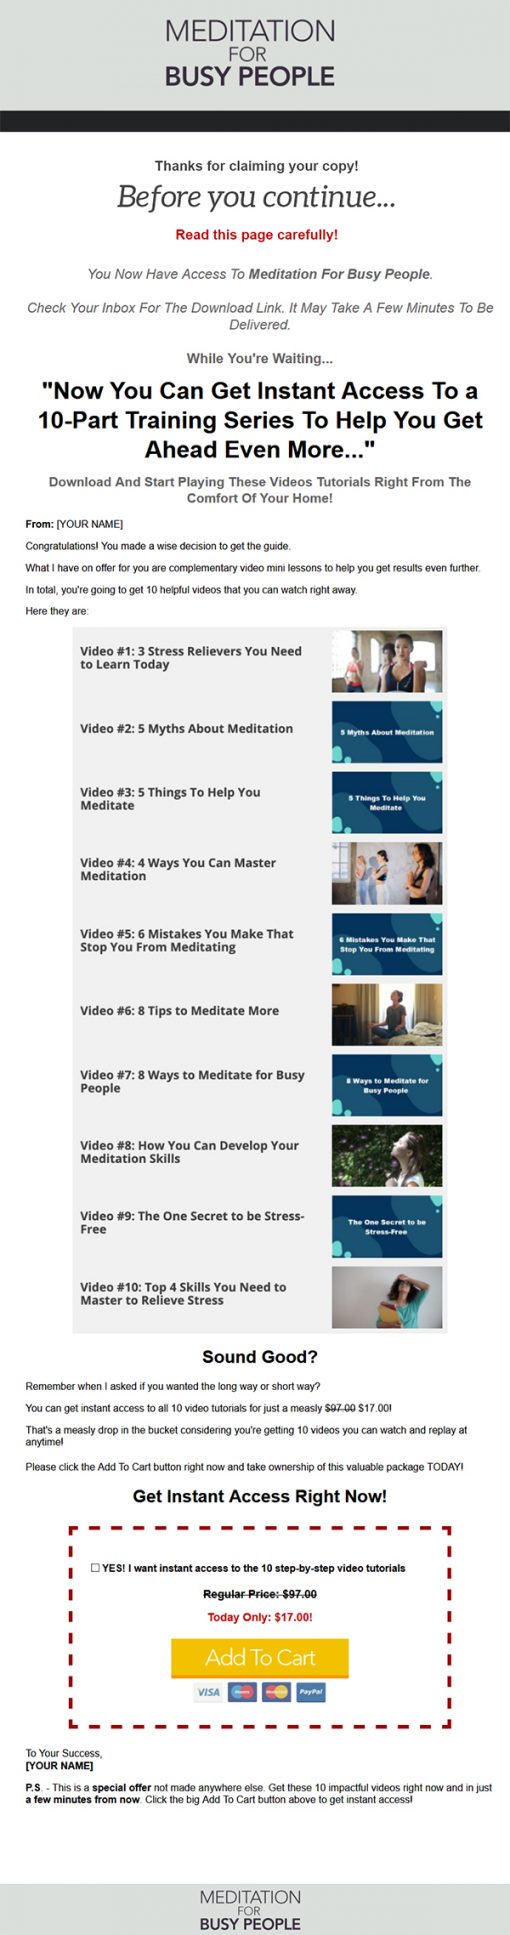 Meditation for Busy People Ebook and Videos MRR